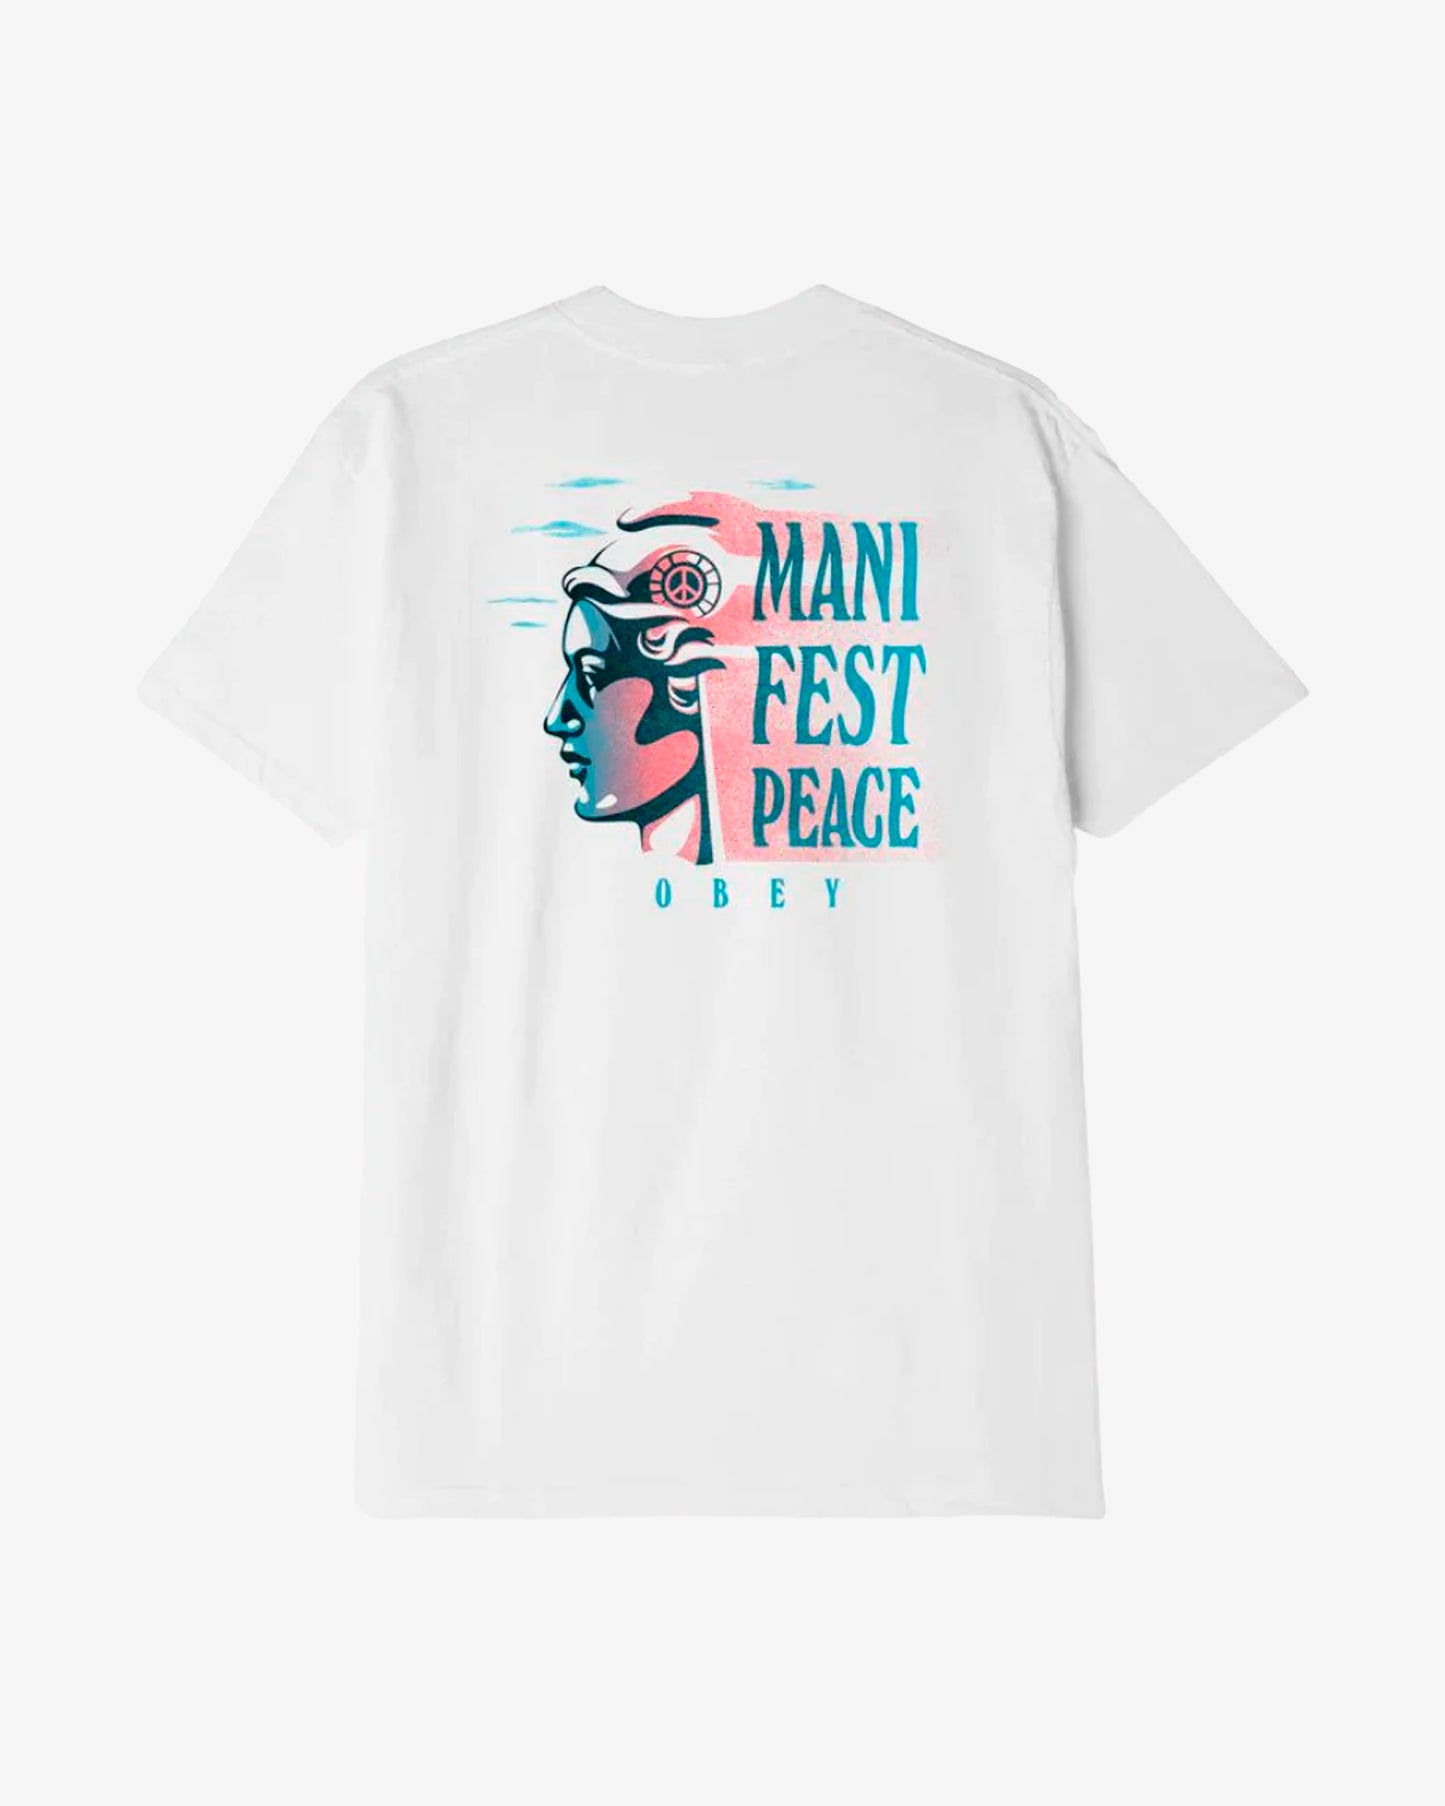 Obey Manifest Peace Tee